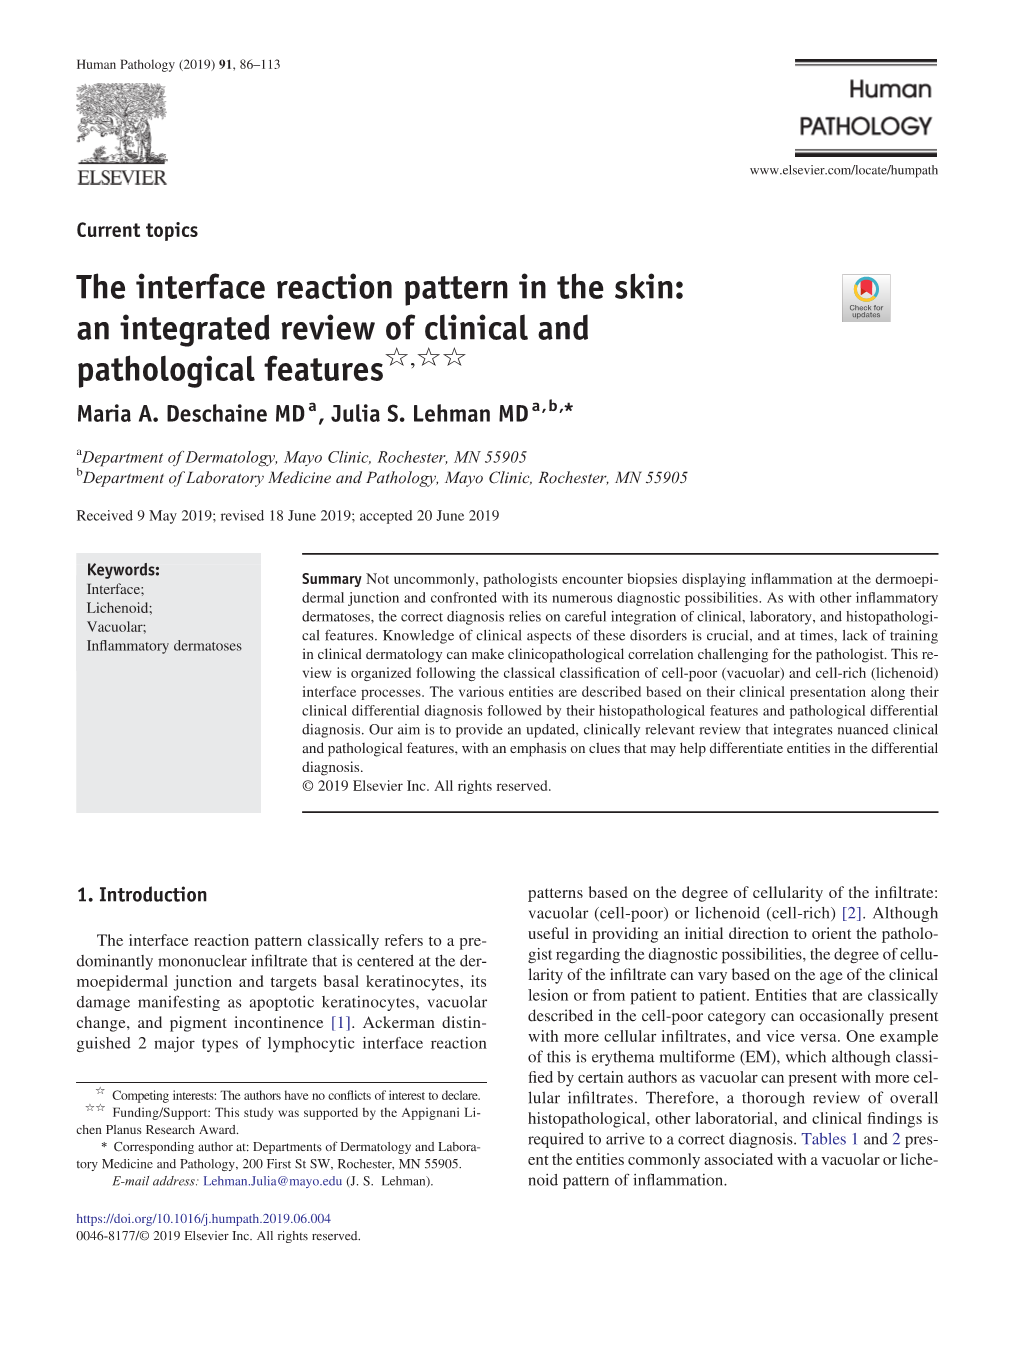 The Interface Reaction Pattern in the Skin: an Integrated Review of Clinical and Pathological Features☆,☆☆ Maria A